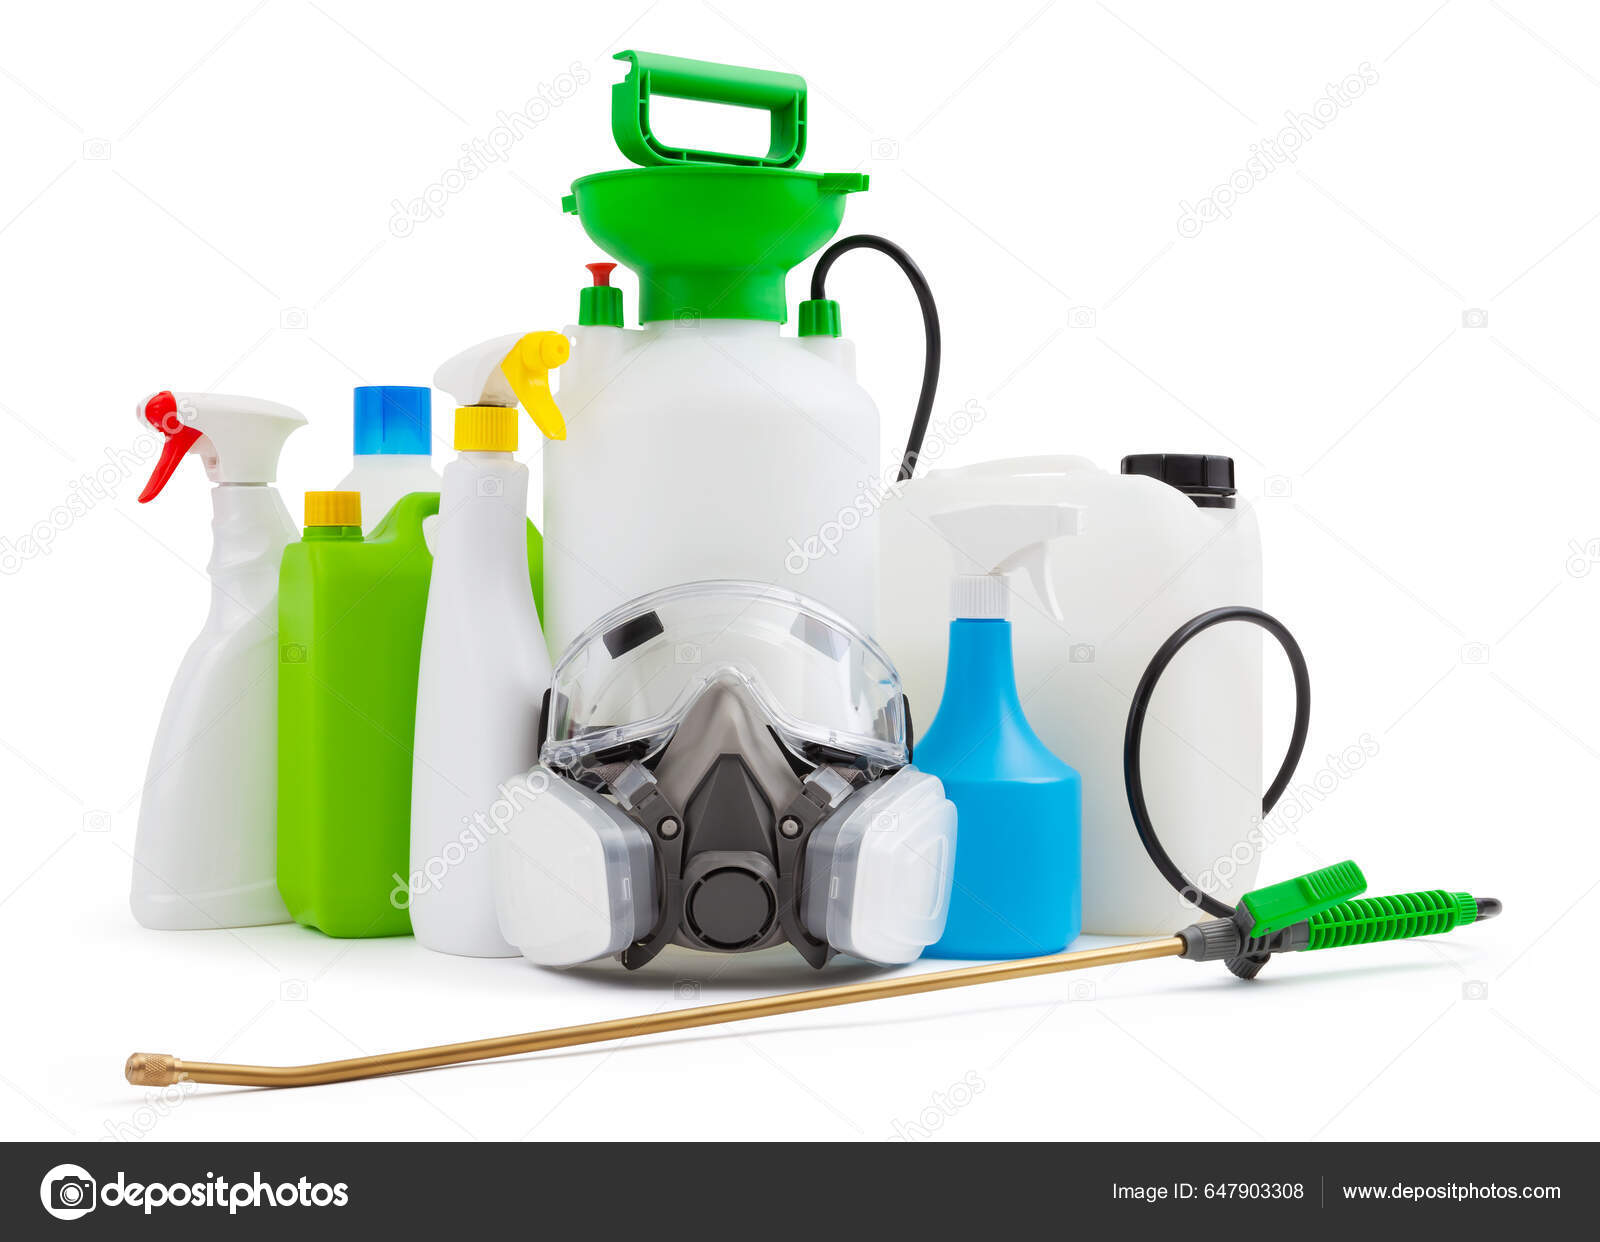 https://st5.depositphotos.com/2714617/64790/i/1600/depositphotos_647903308-stock-photo-cleaning-disinfection-tools-kit-isolated.jpg